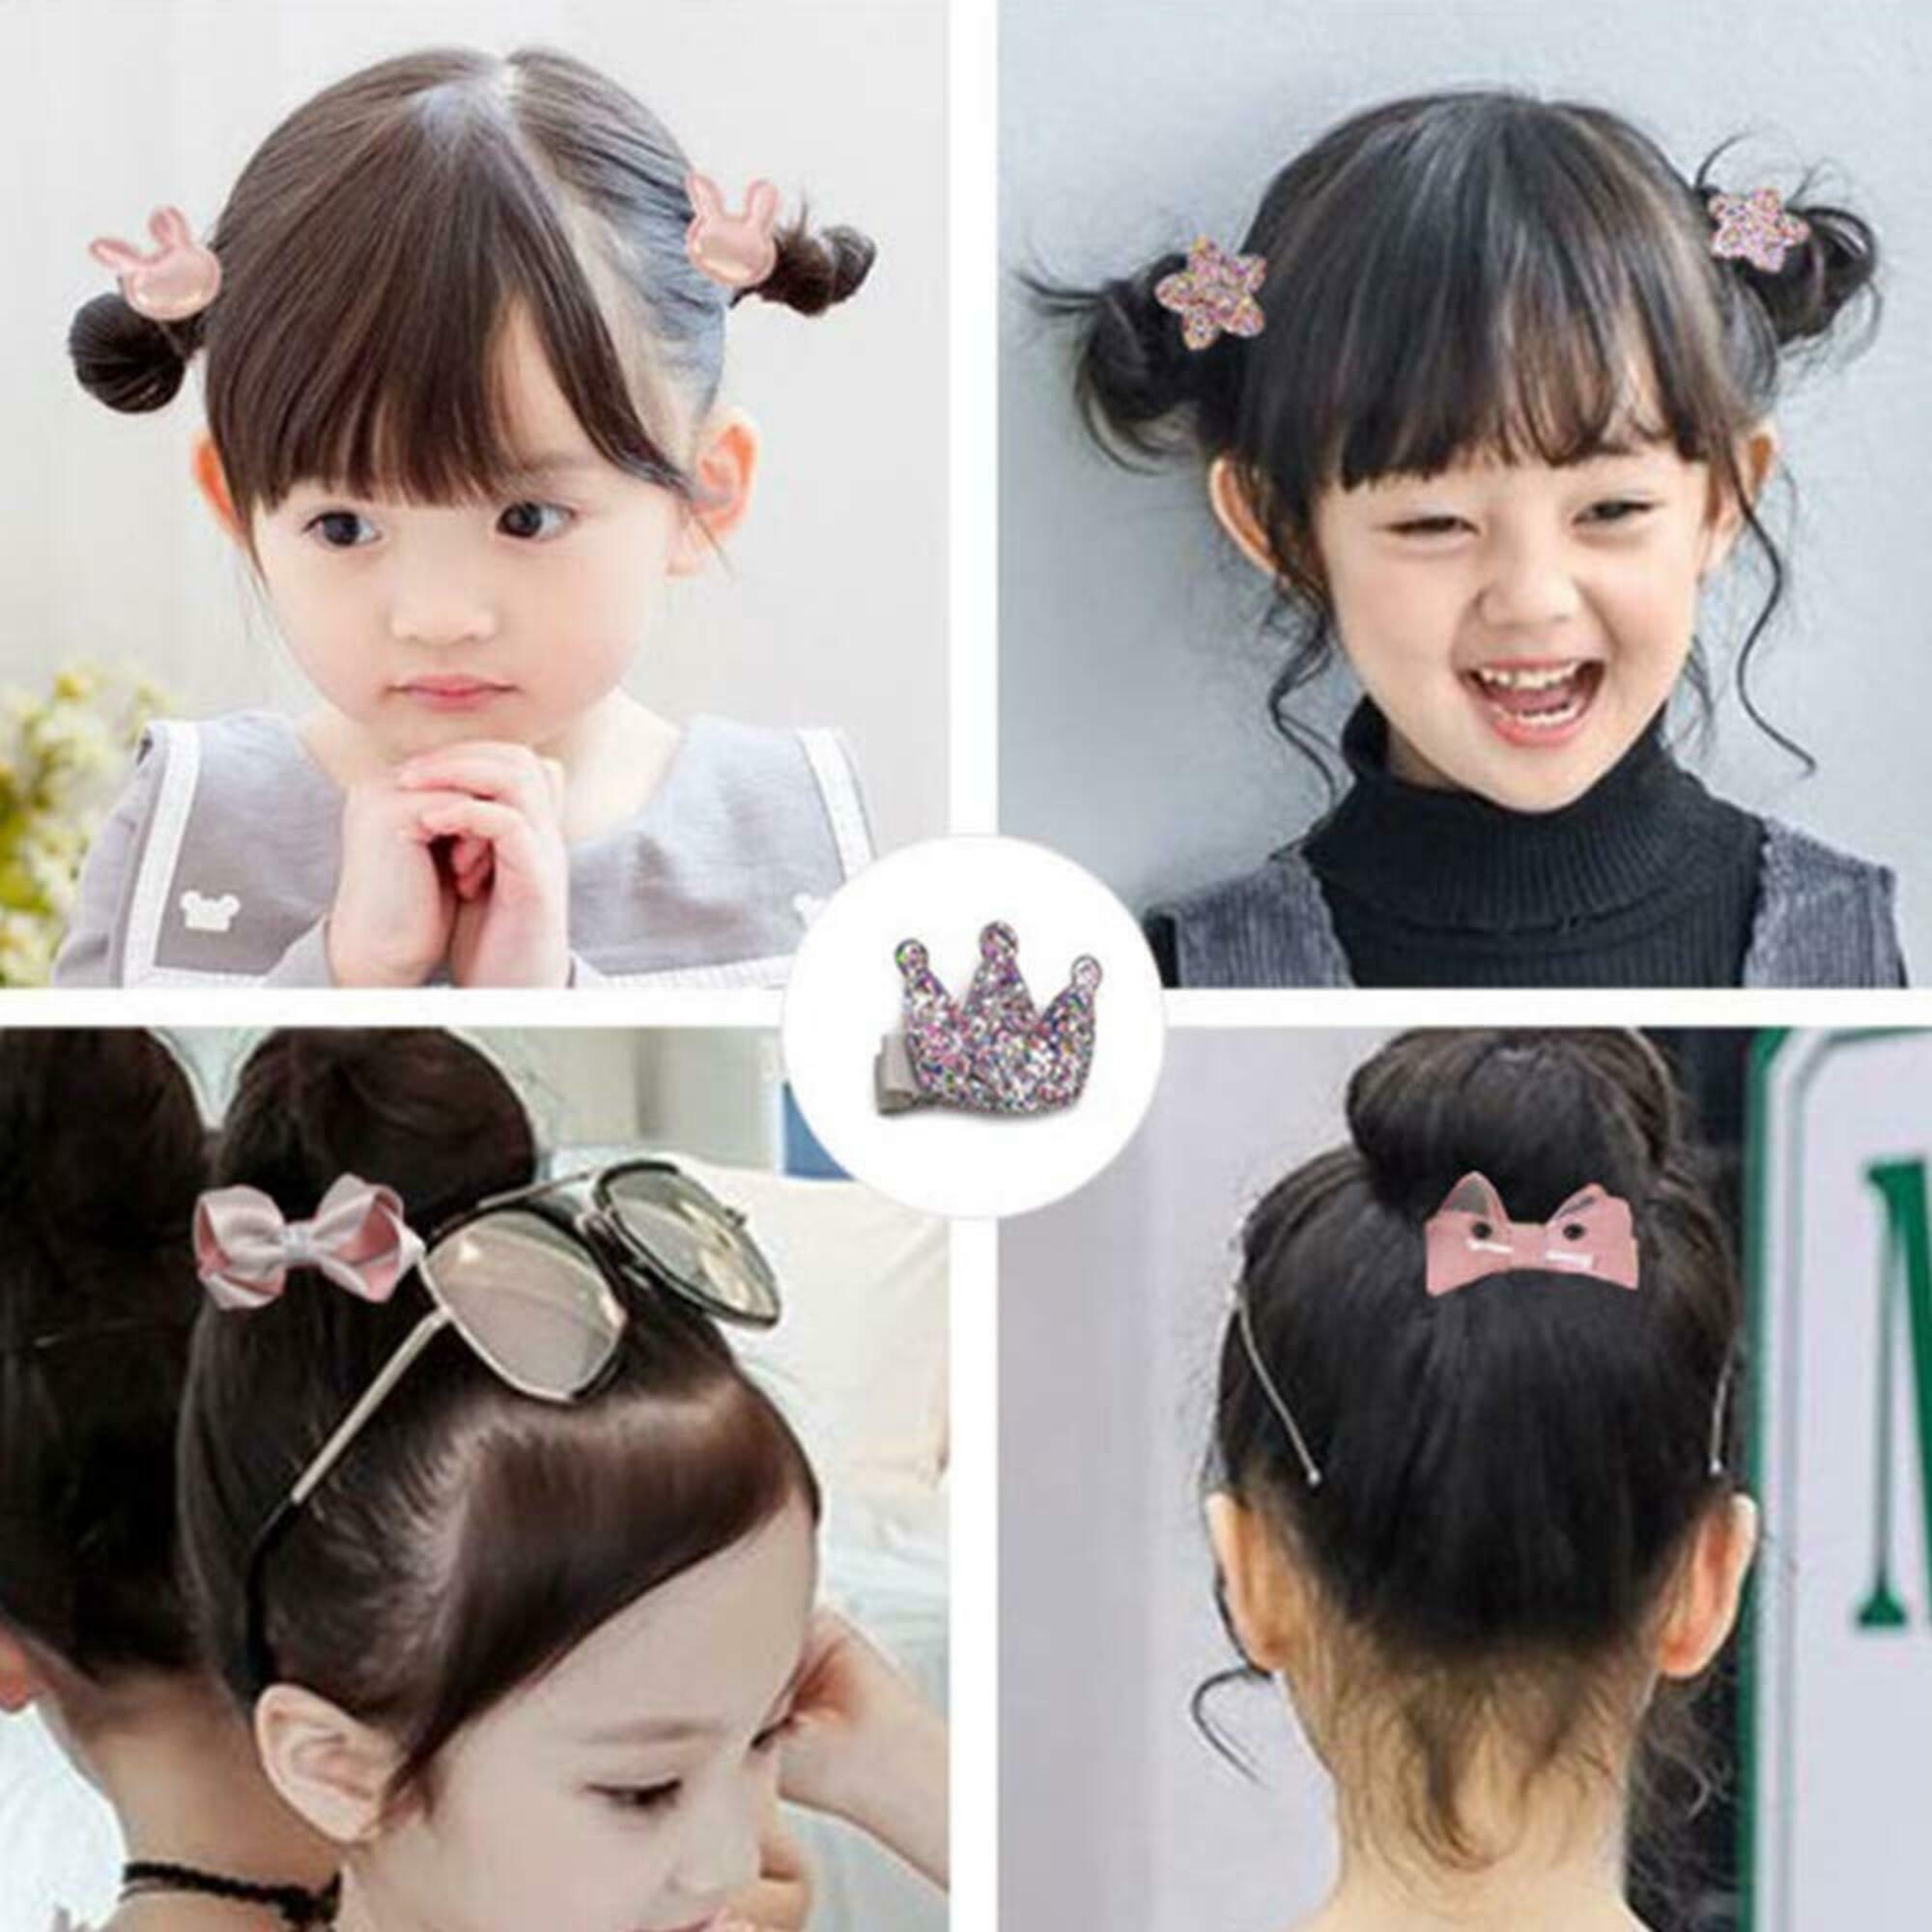 Multi-colored Baby Girl's Hair Clips Cute Hair Bows Baby Elastic Hair Ties Hair Accessories Ponytail Holder Hairpins Set For Baby Girls Teens Toddlers Assorted styles 36 pieces Pack 